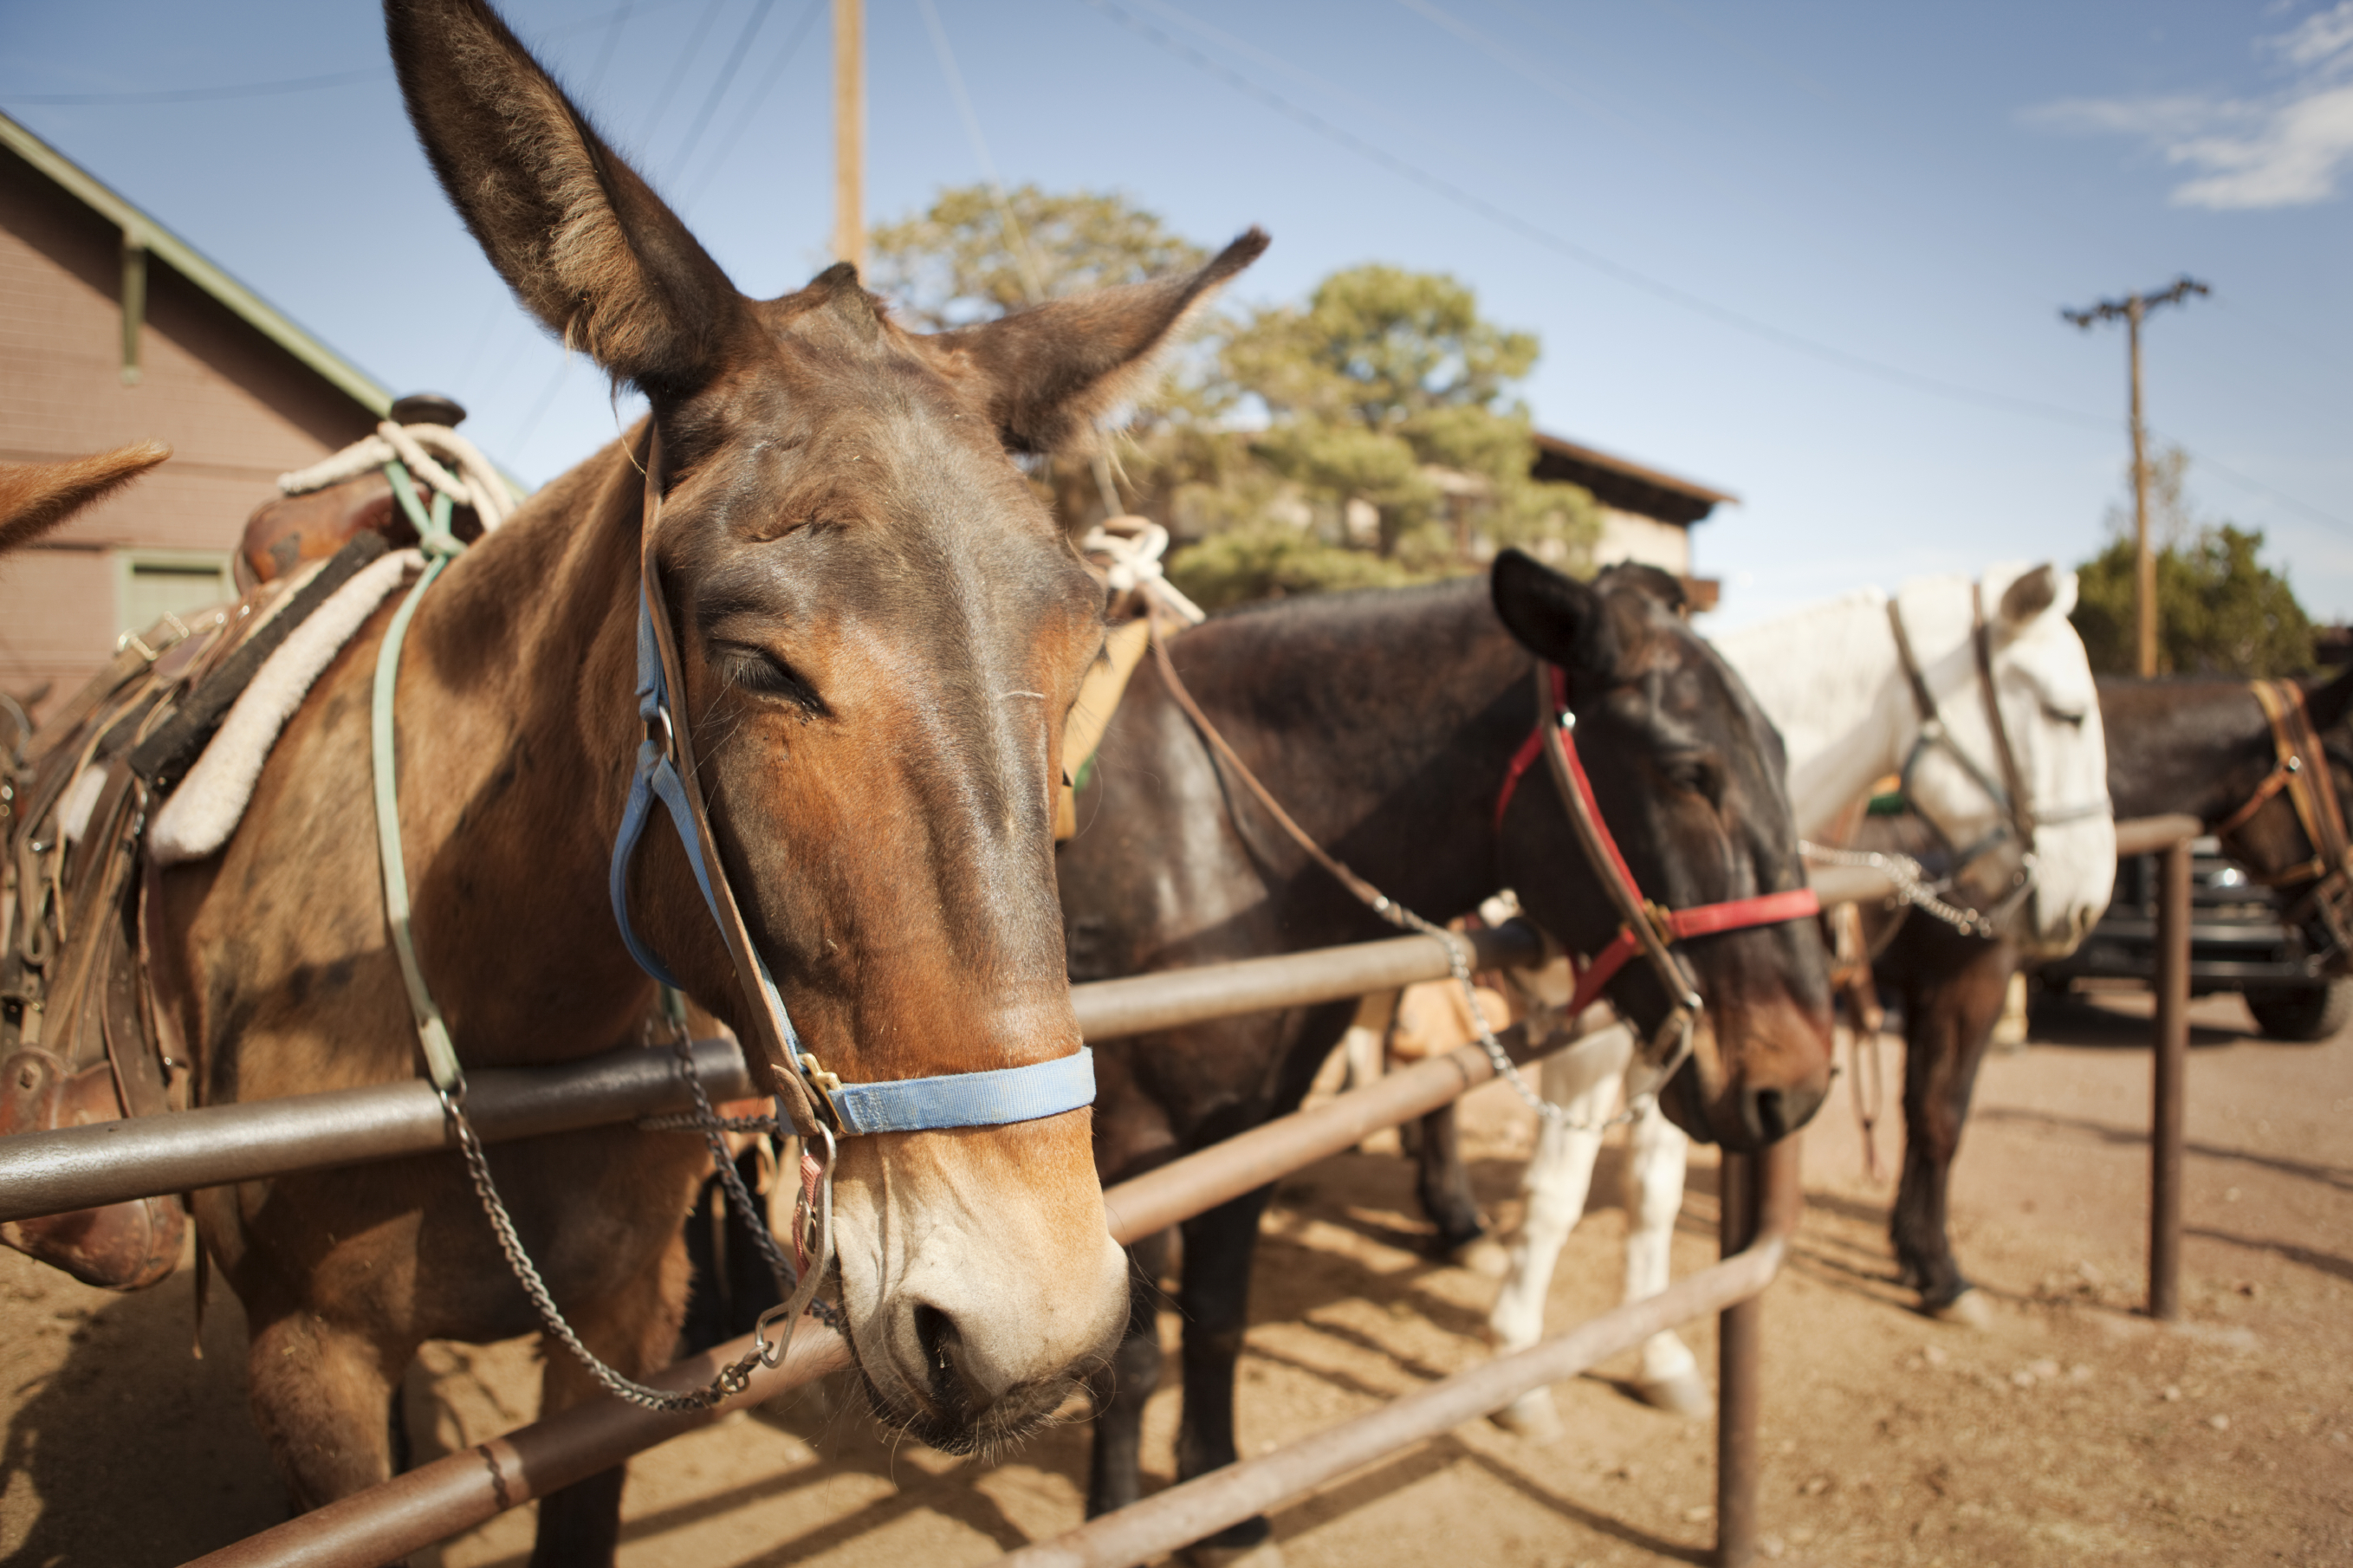 The History of Mules at the Grand Canyon